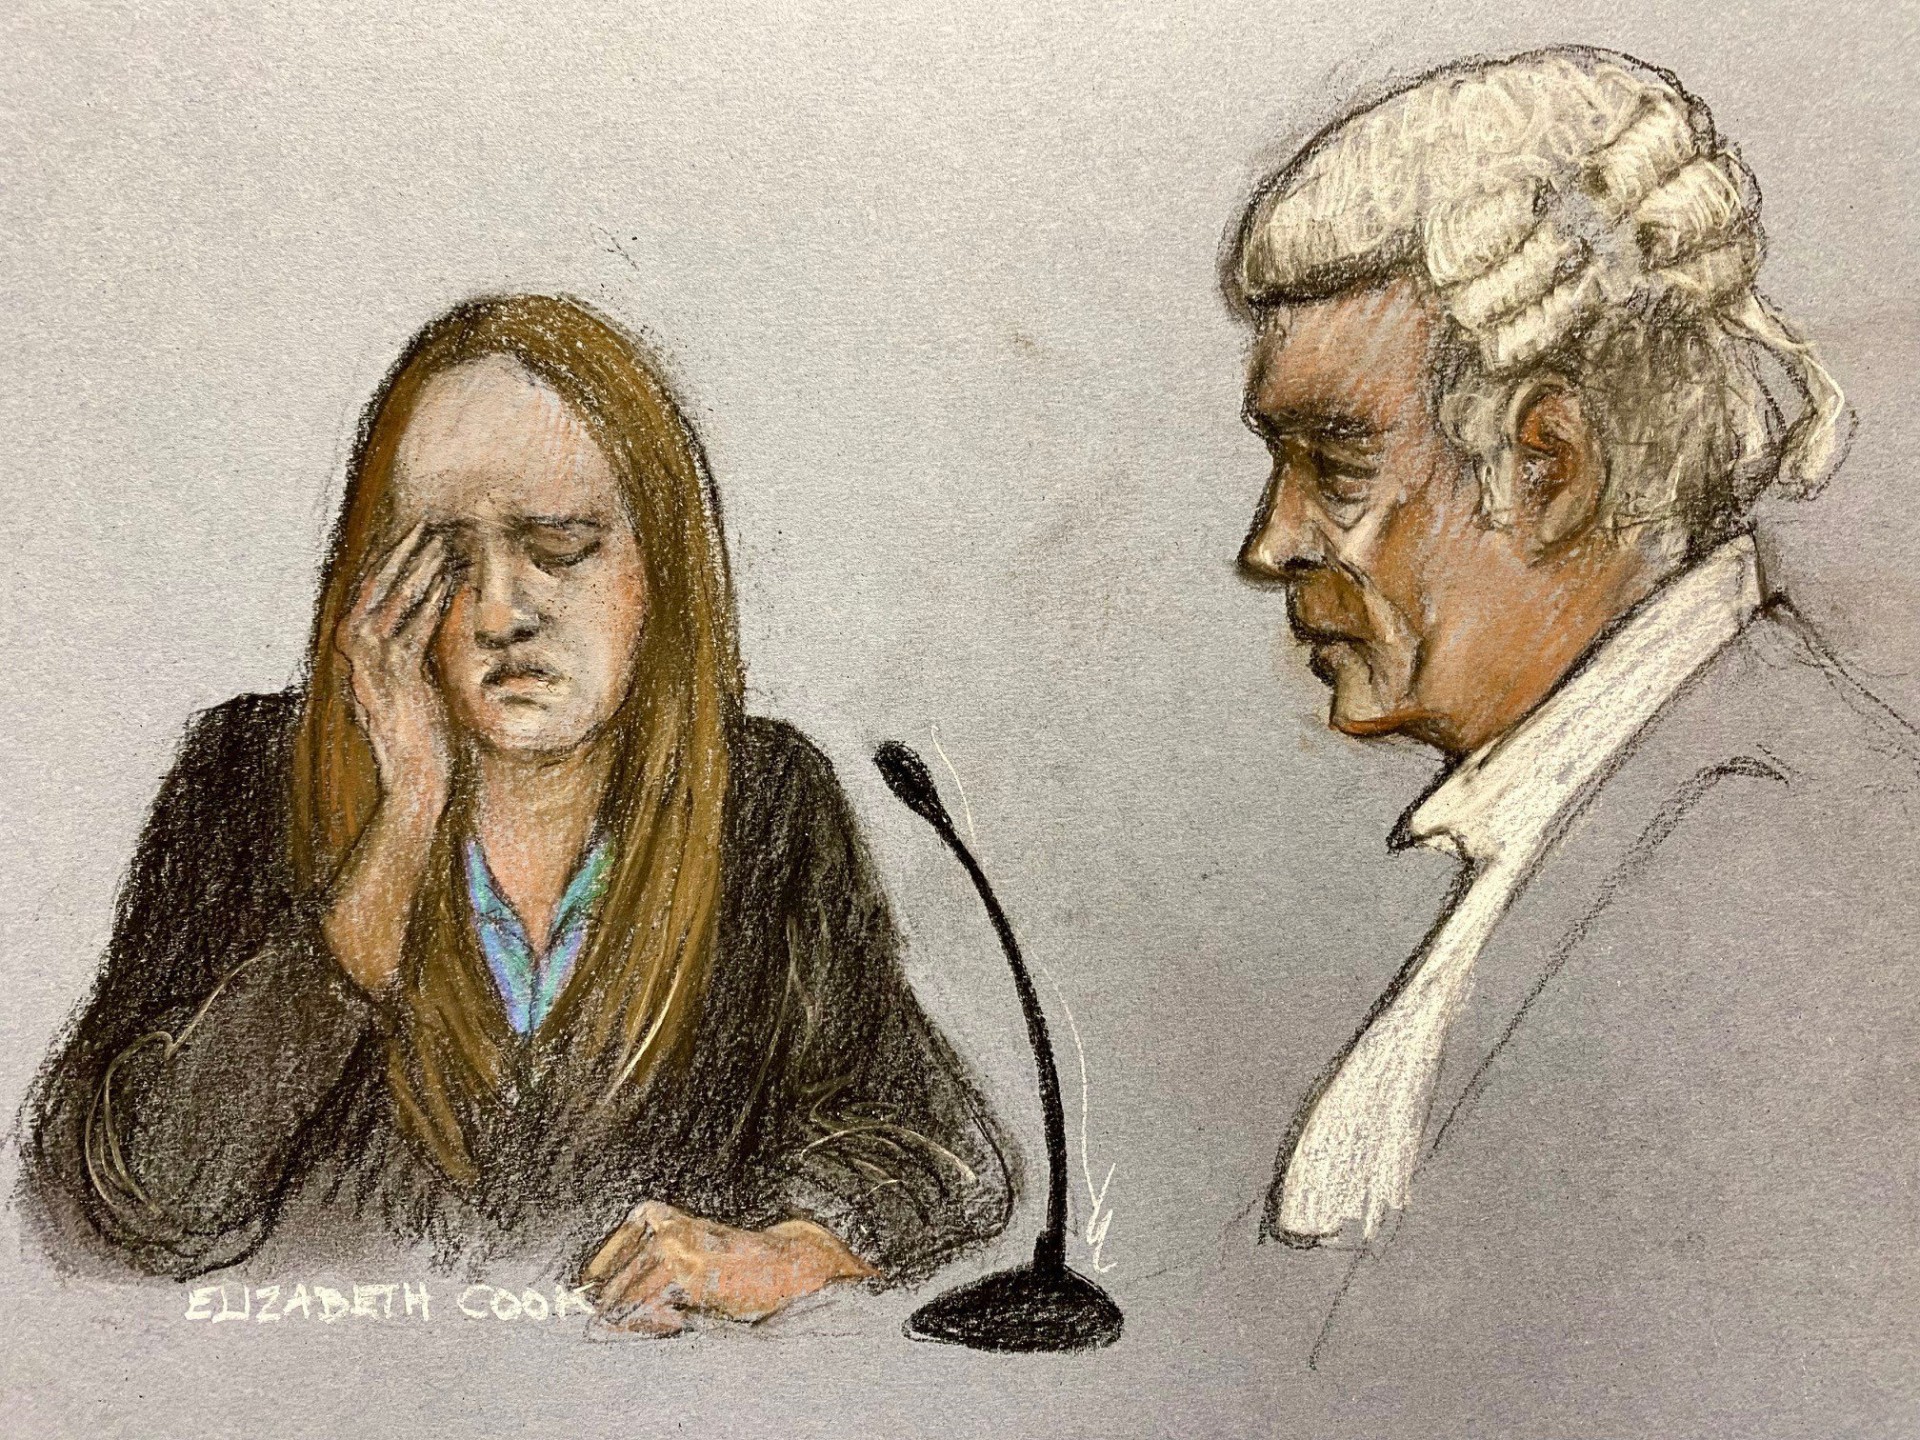 lucy letby denies being a ‘very calculating’ killer with 'a sob story'